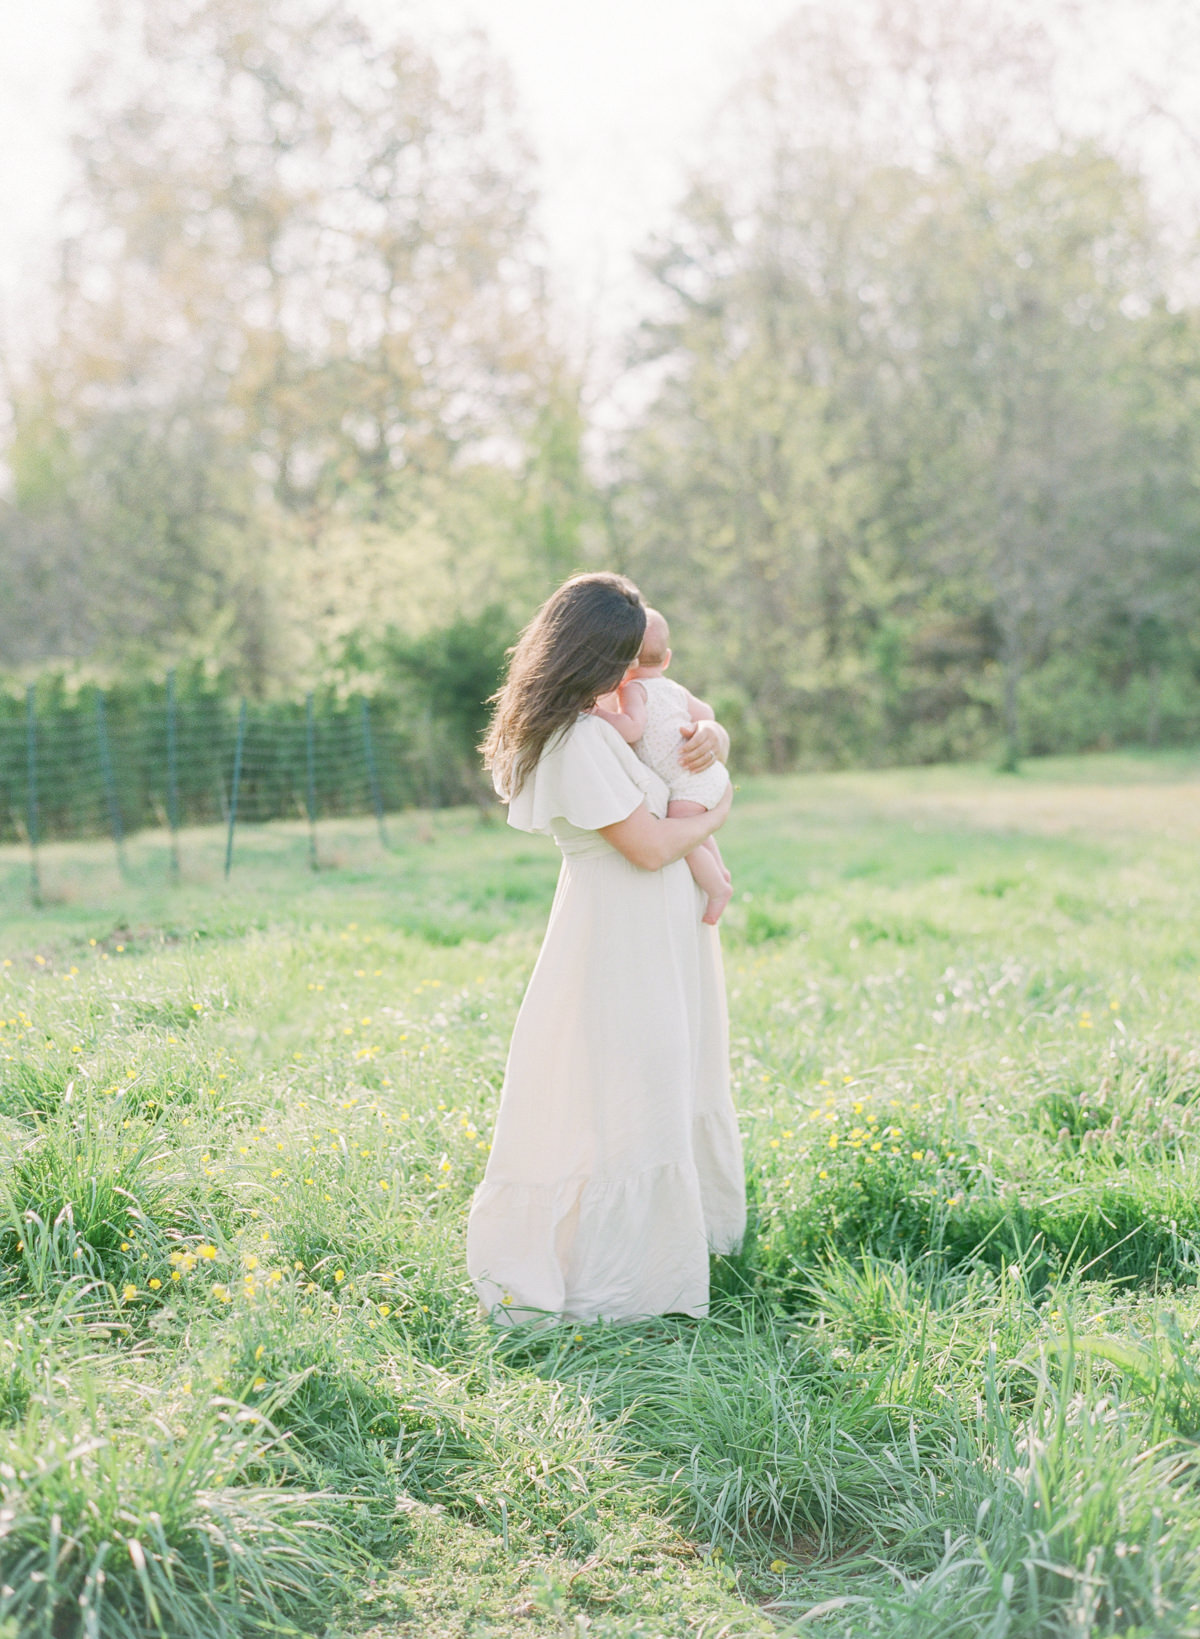 Kent-Avenue-Photography-Charlotte-Newborn-Photographers-On-Film-Mom-standing-holding-baby-in-field